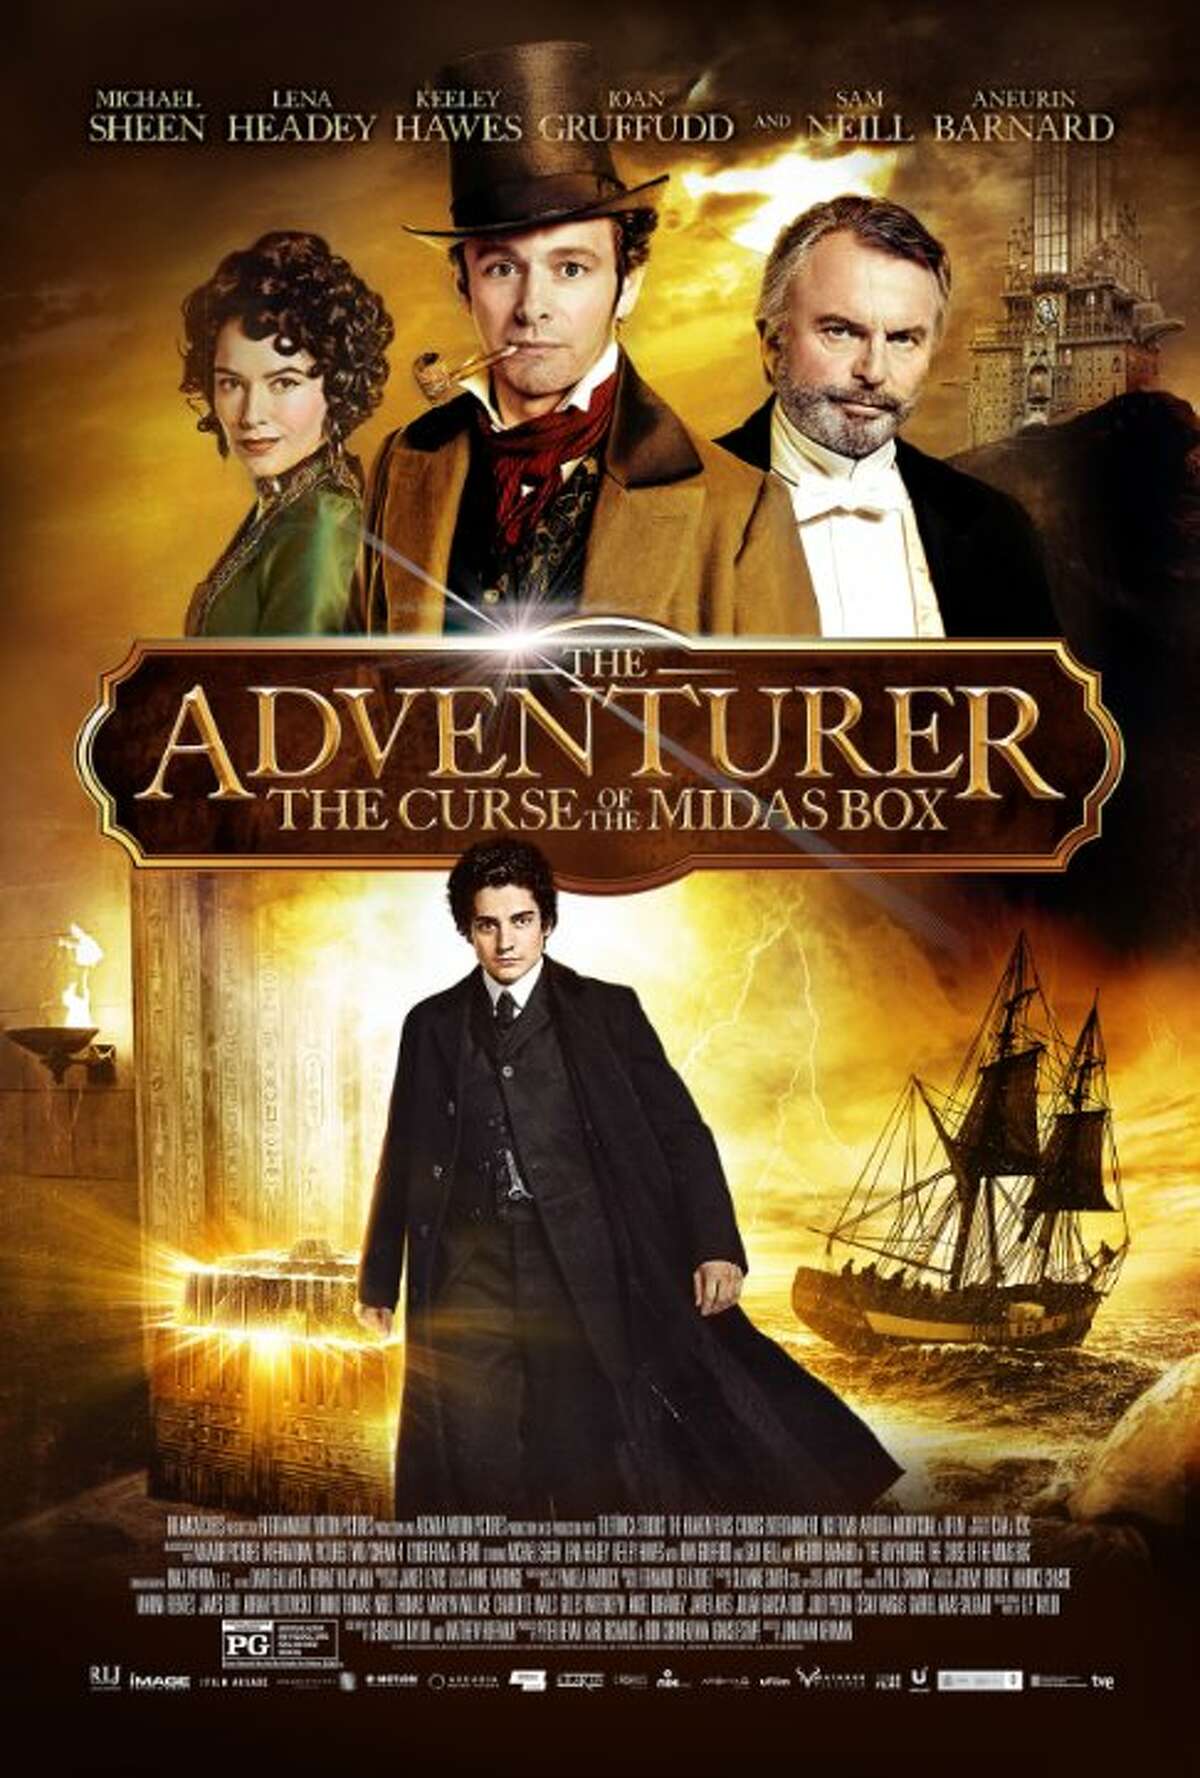 Adventurer: The Curse of the Midas Box Starring: Michael Sheen, Lena Headey, Sam Neill Release date: Jan. 10 When Mariah's brother is kidnapped, he discovers that the key to getting him back hinges on finding an extraordinary box that turns everything placed inside it to gold.